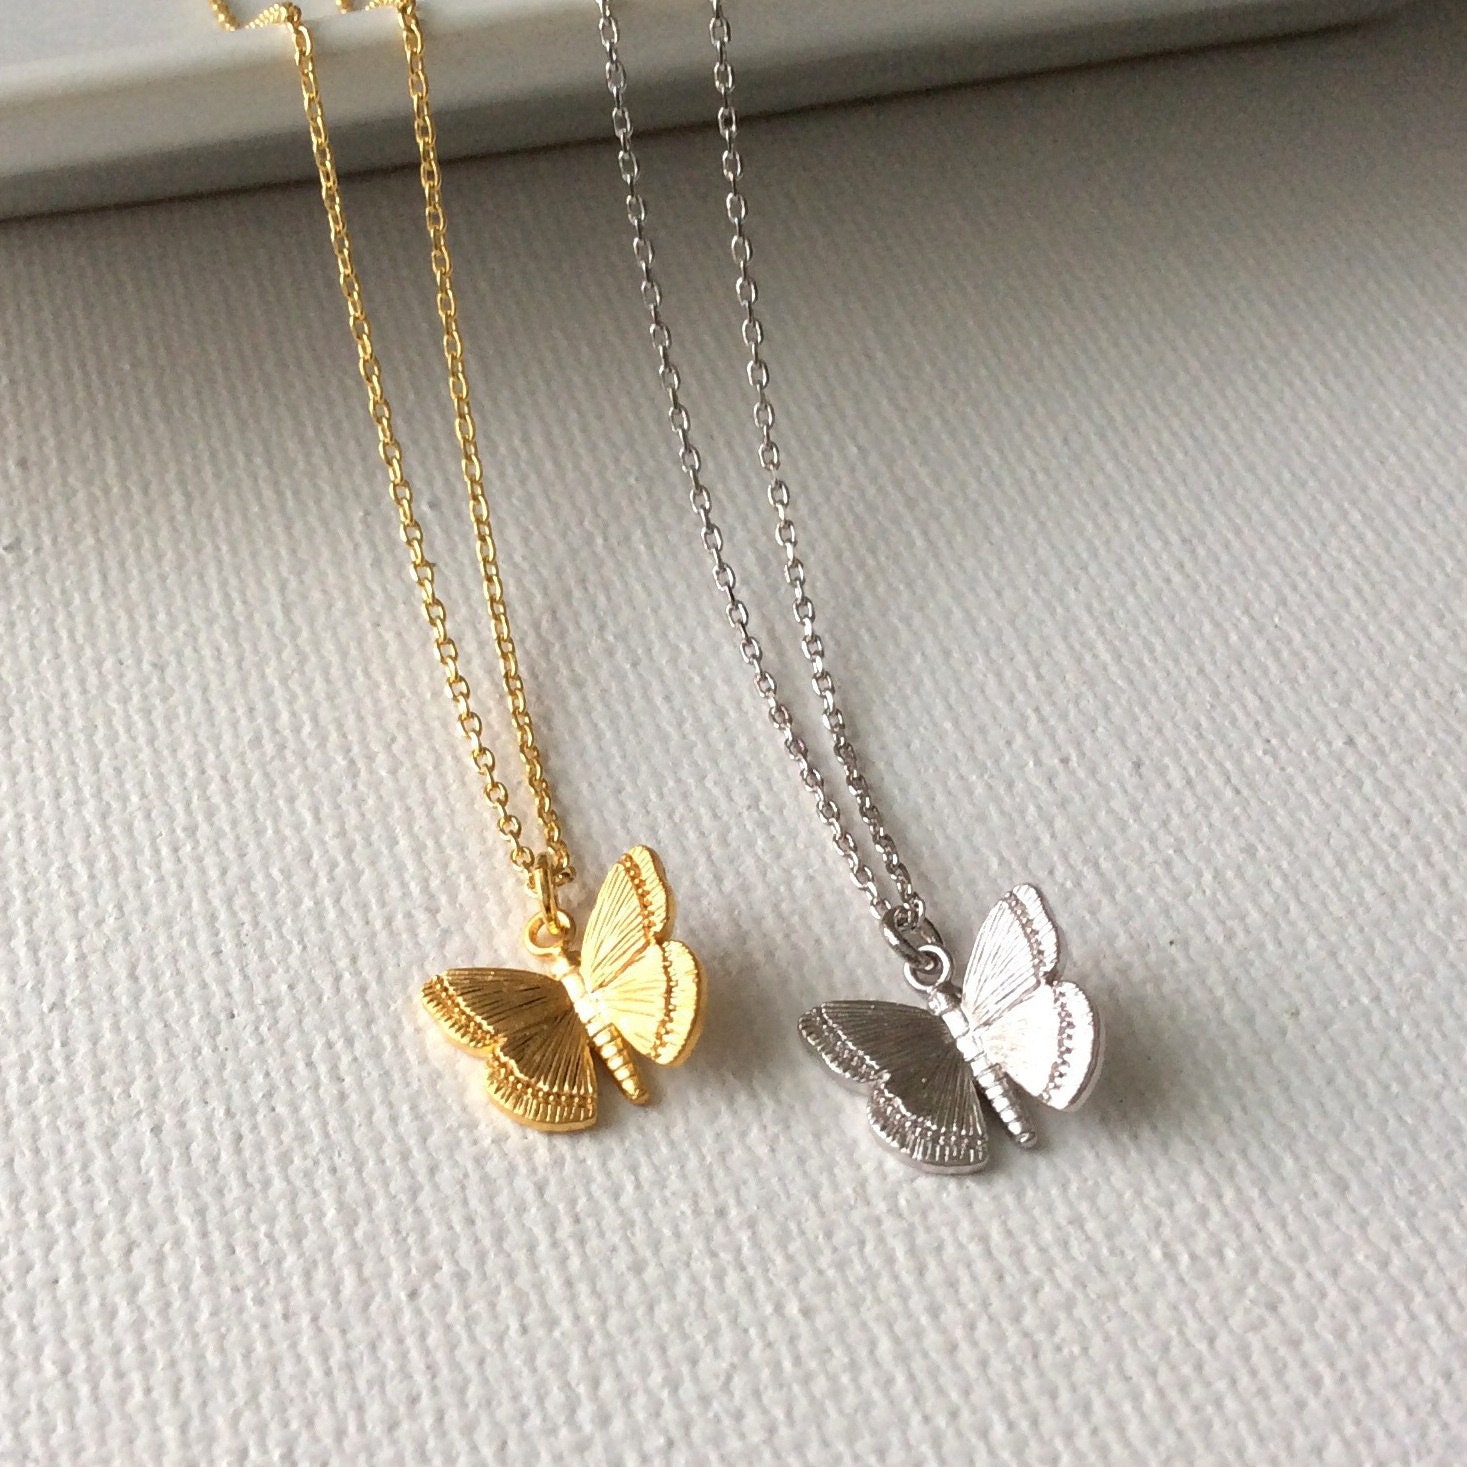 Butterfly Necklace, silver butterfly necklace, gold butterfly necklace, butterfly charm jewelry, Bridesmaid jewelry, Wedding jewelry